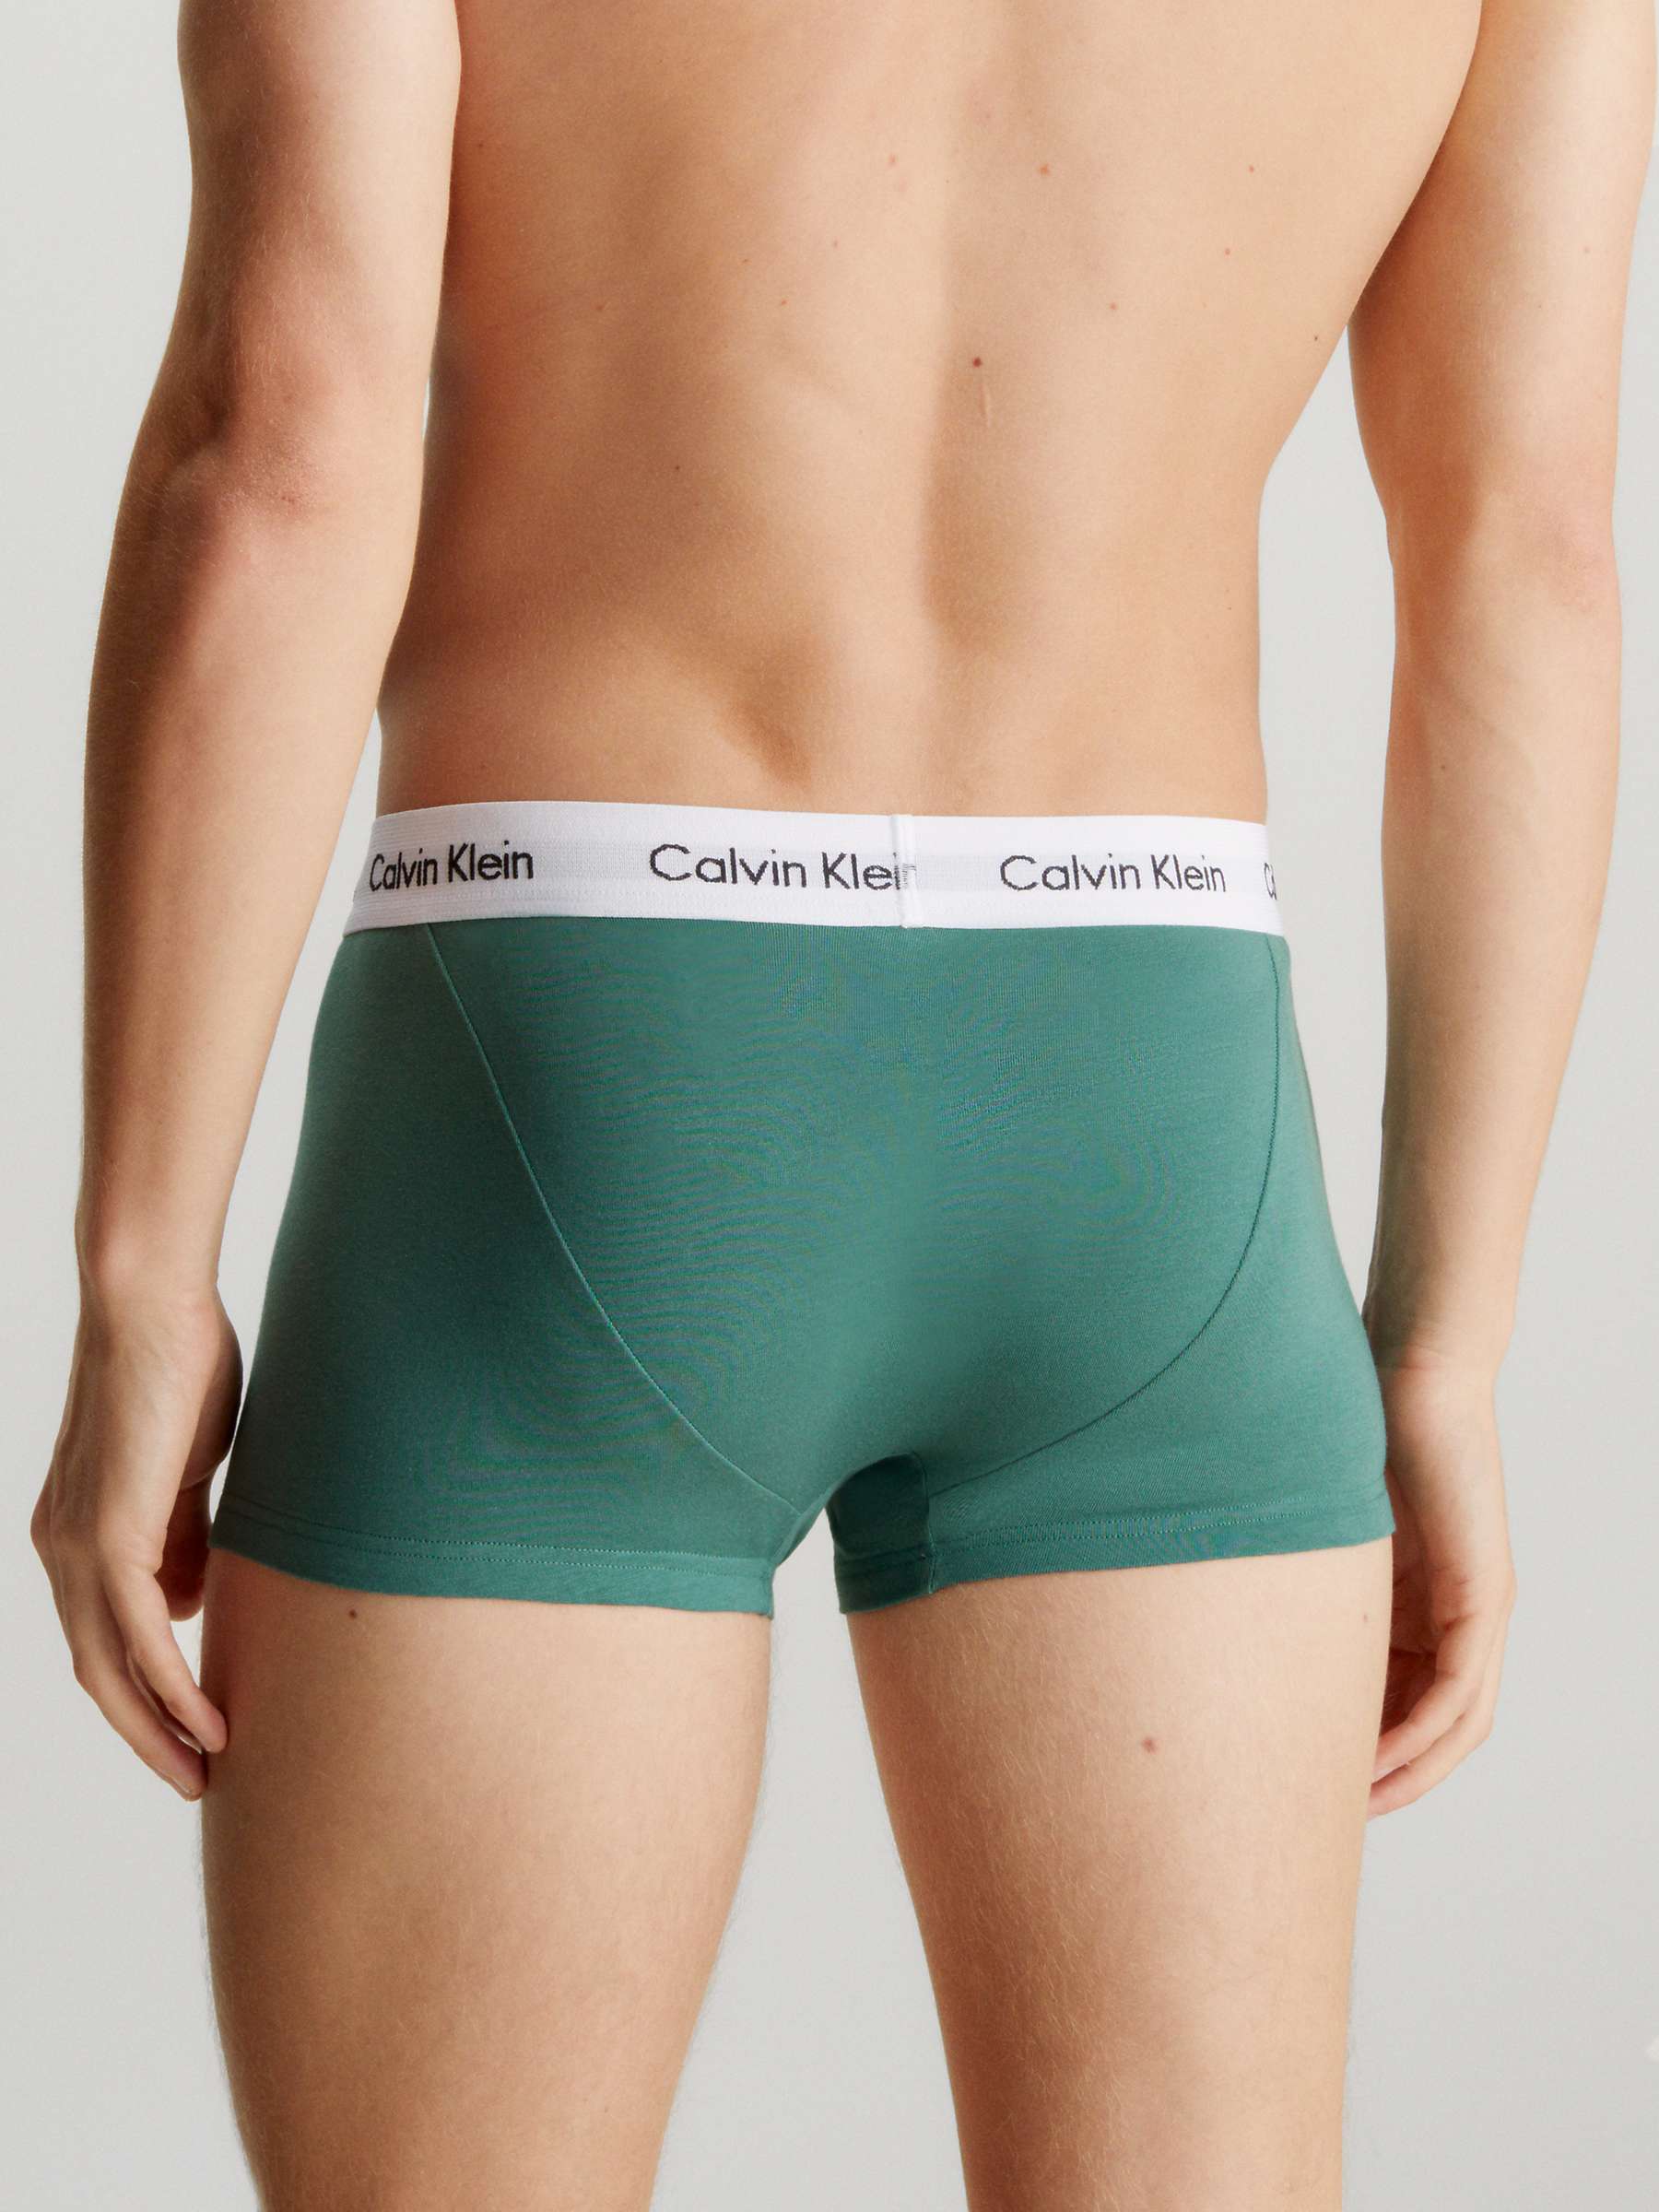 Buy Calvin Klein Low Rise Boxer Briefs, Pack of, Blue, Arona, Green Online at johnlewis.com